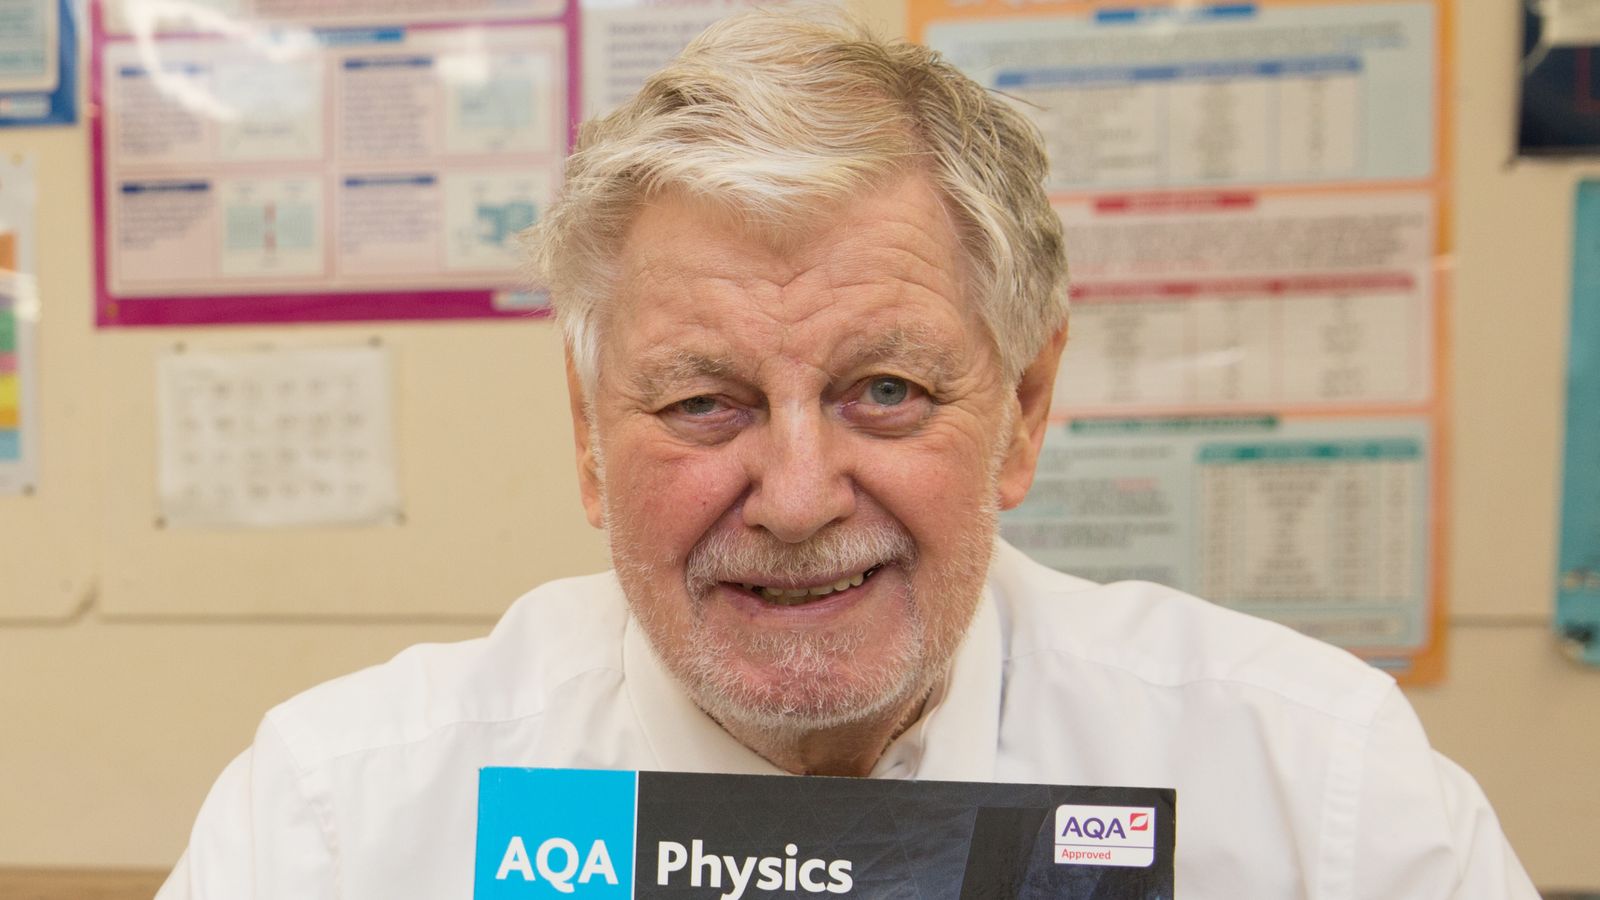 Pensioner, 84, returns to school after 66 years to pass GCSE physics exam